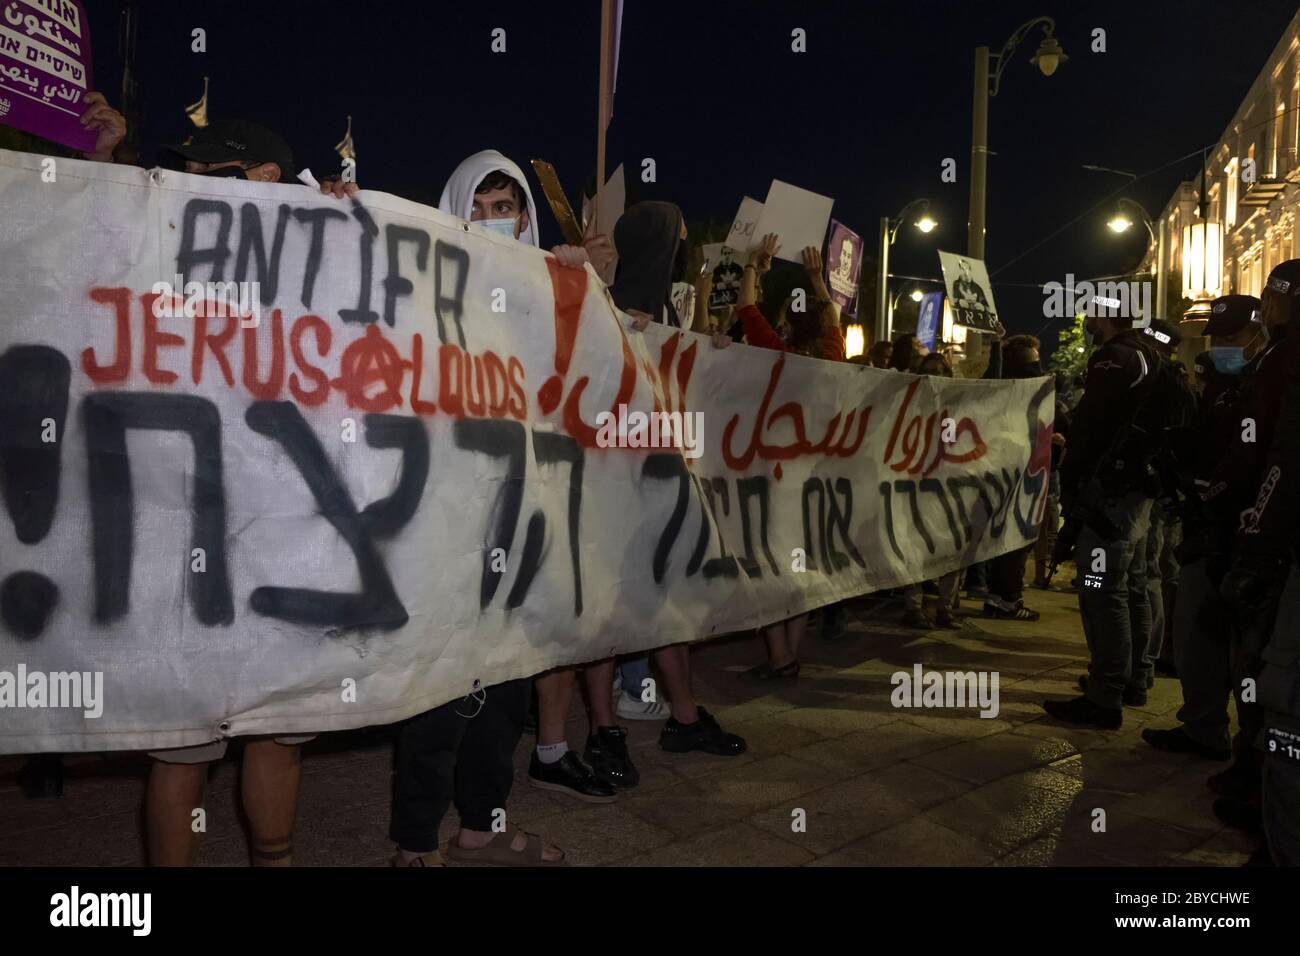 Jerusalem, Israel. 9th June, 2020. Left-wing activists attending a protest in Jerusalem on June 9, 2020 against the killing of Iyad Hallak, a disabled Palestinian man shot dead by Israeli police as well of the killing of unarmed African-American George Floyd. Credit: Eddie Gerald/Alamy Live News Stock Photo